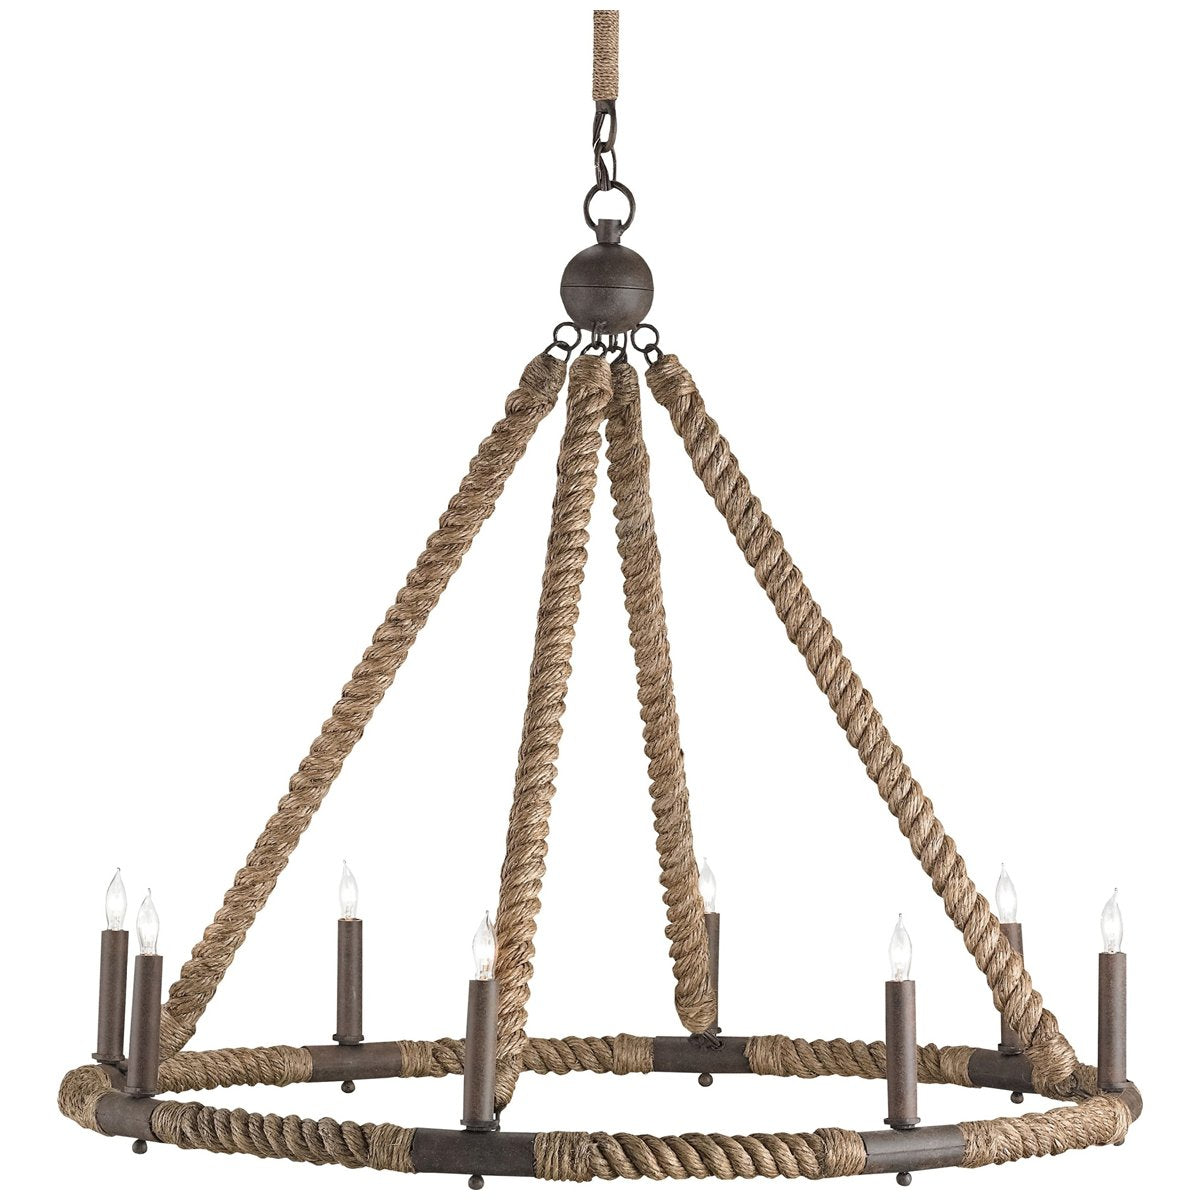 Currey and Company Bowline Chandelier